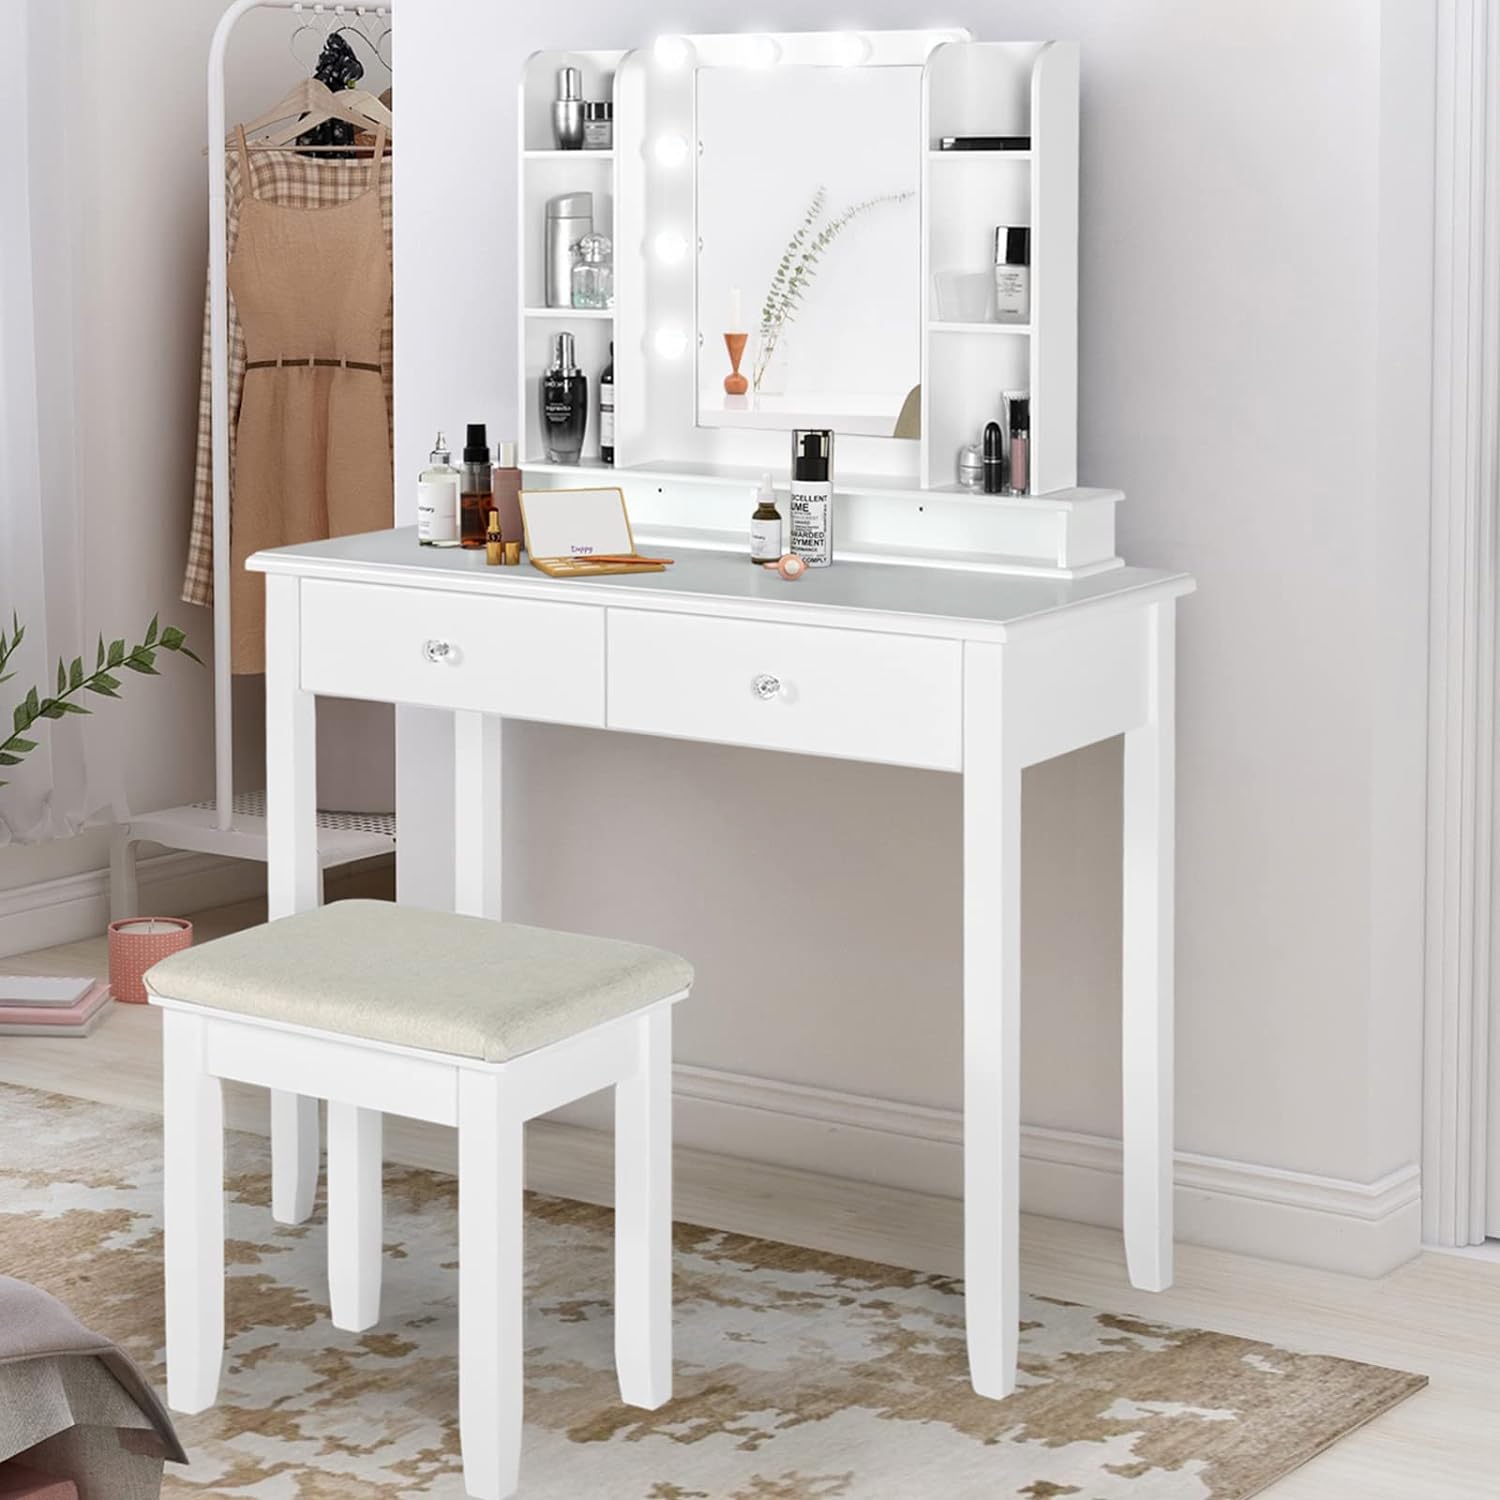 AODAILIHB Vanity Desk with Mirror and Lights, 35 Makeup Vanity Dressing Table with Vanity Stool/2 Drawers/Open Shelves/3 Color Lighting Modes & Brightness Bedroom Furniture (White)